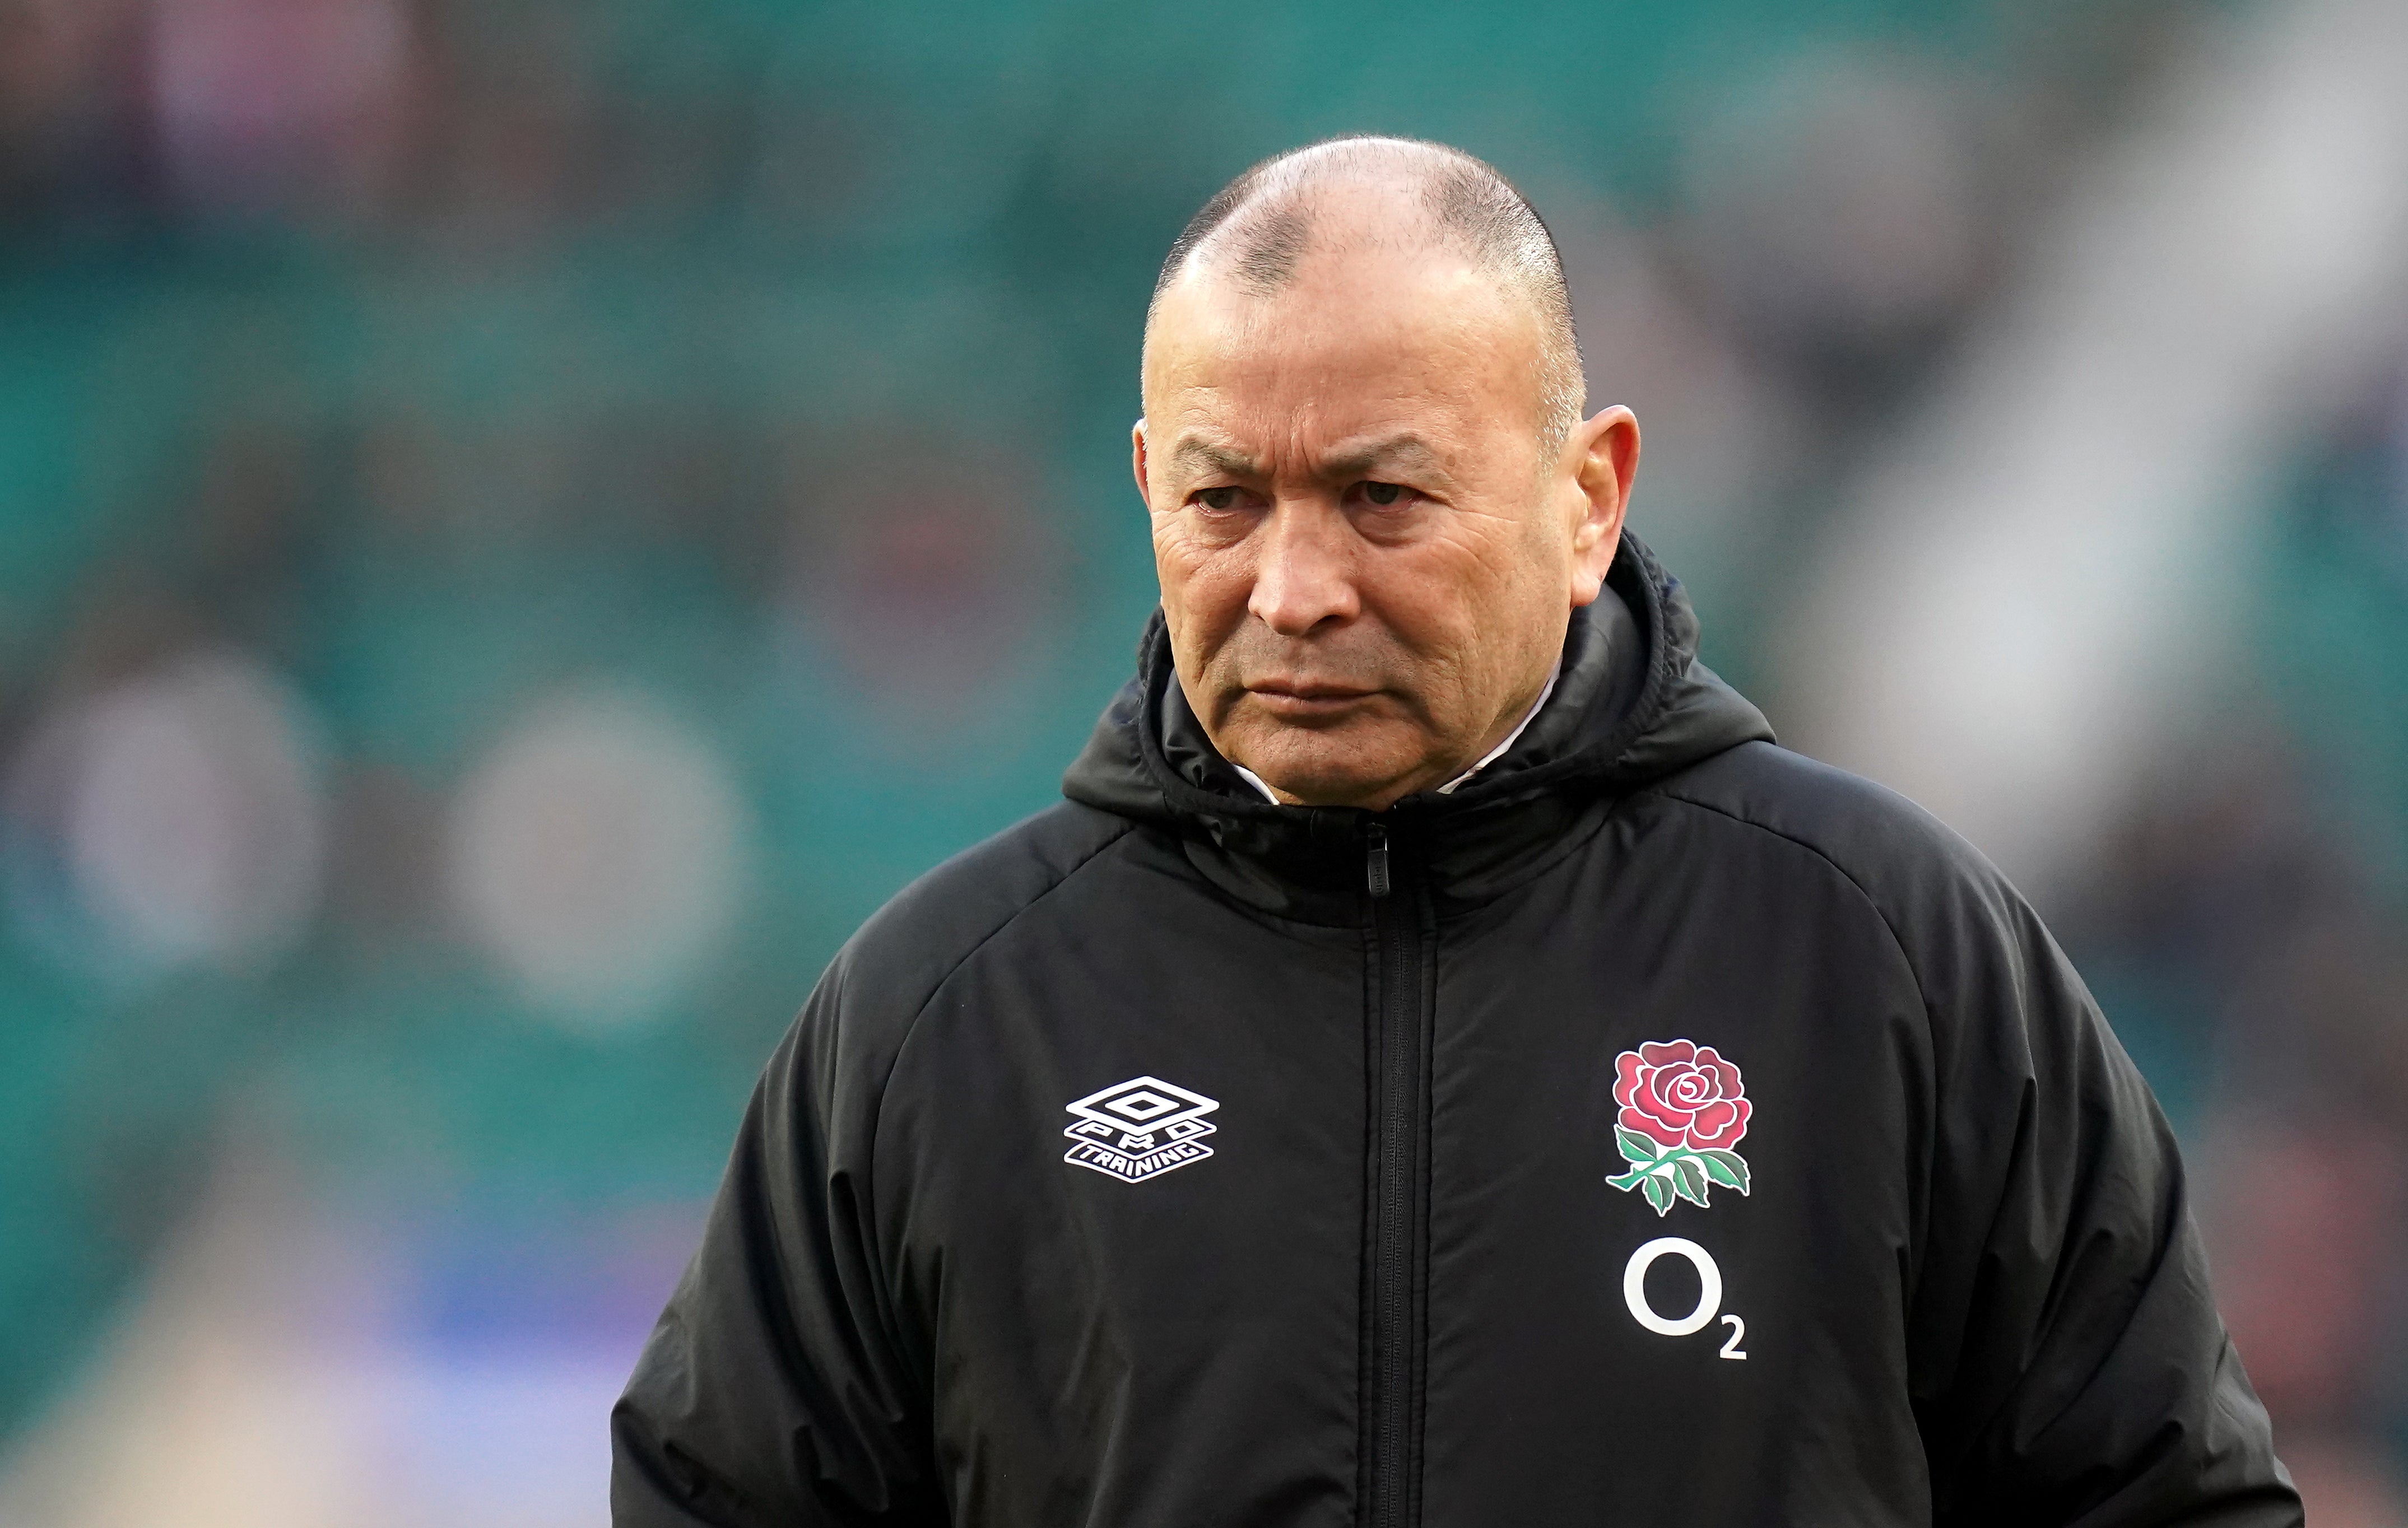 Eddie Jones says England are ready for their title rivals Ireland and France (Adam Davy/PA)